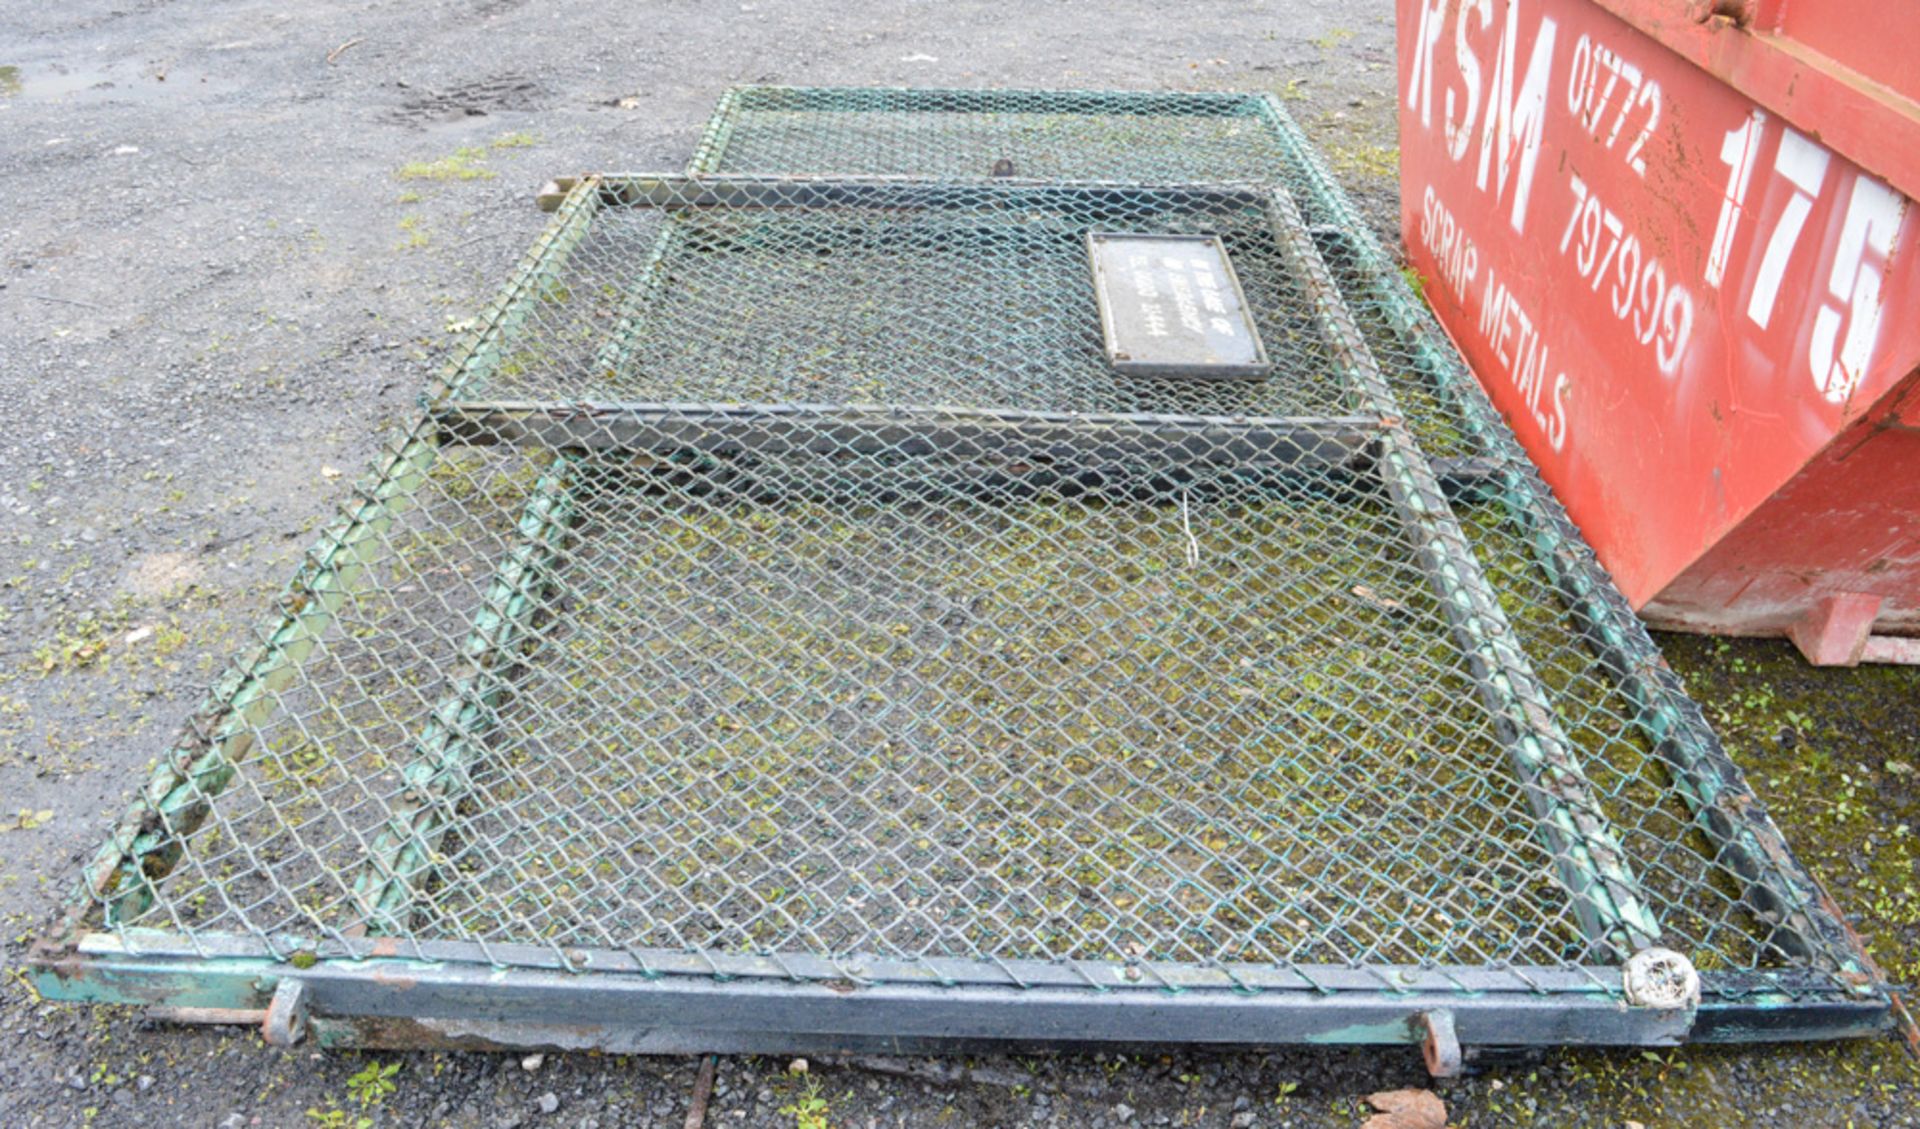 Pair of steel gates Dimensions: 6ft x 9ft & 6ft x 13ft